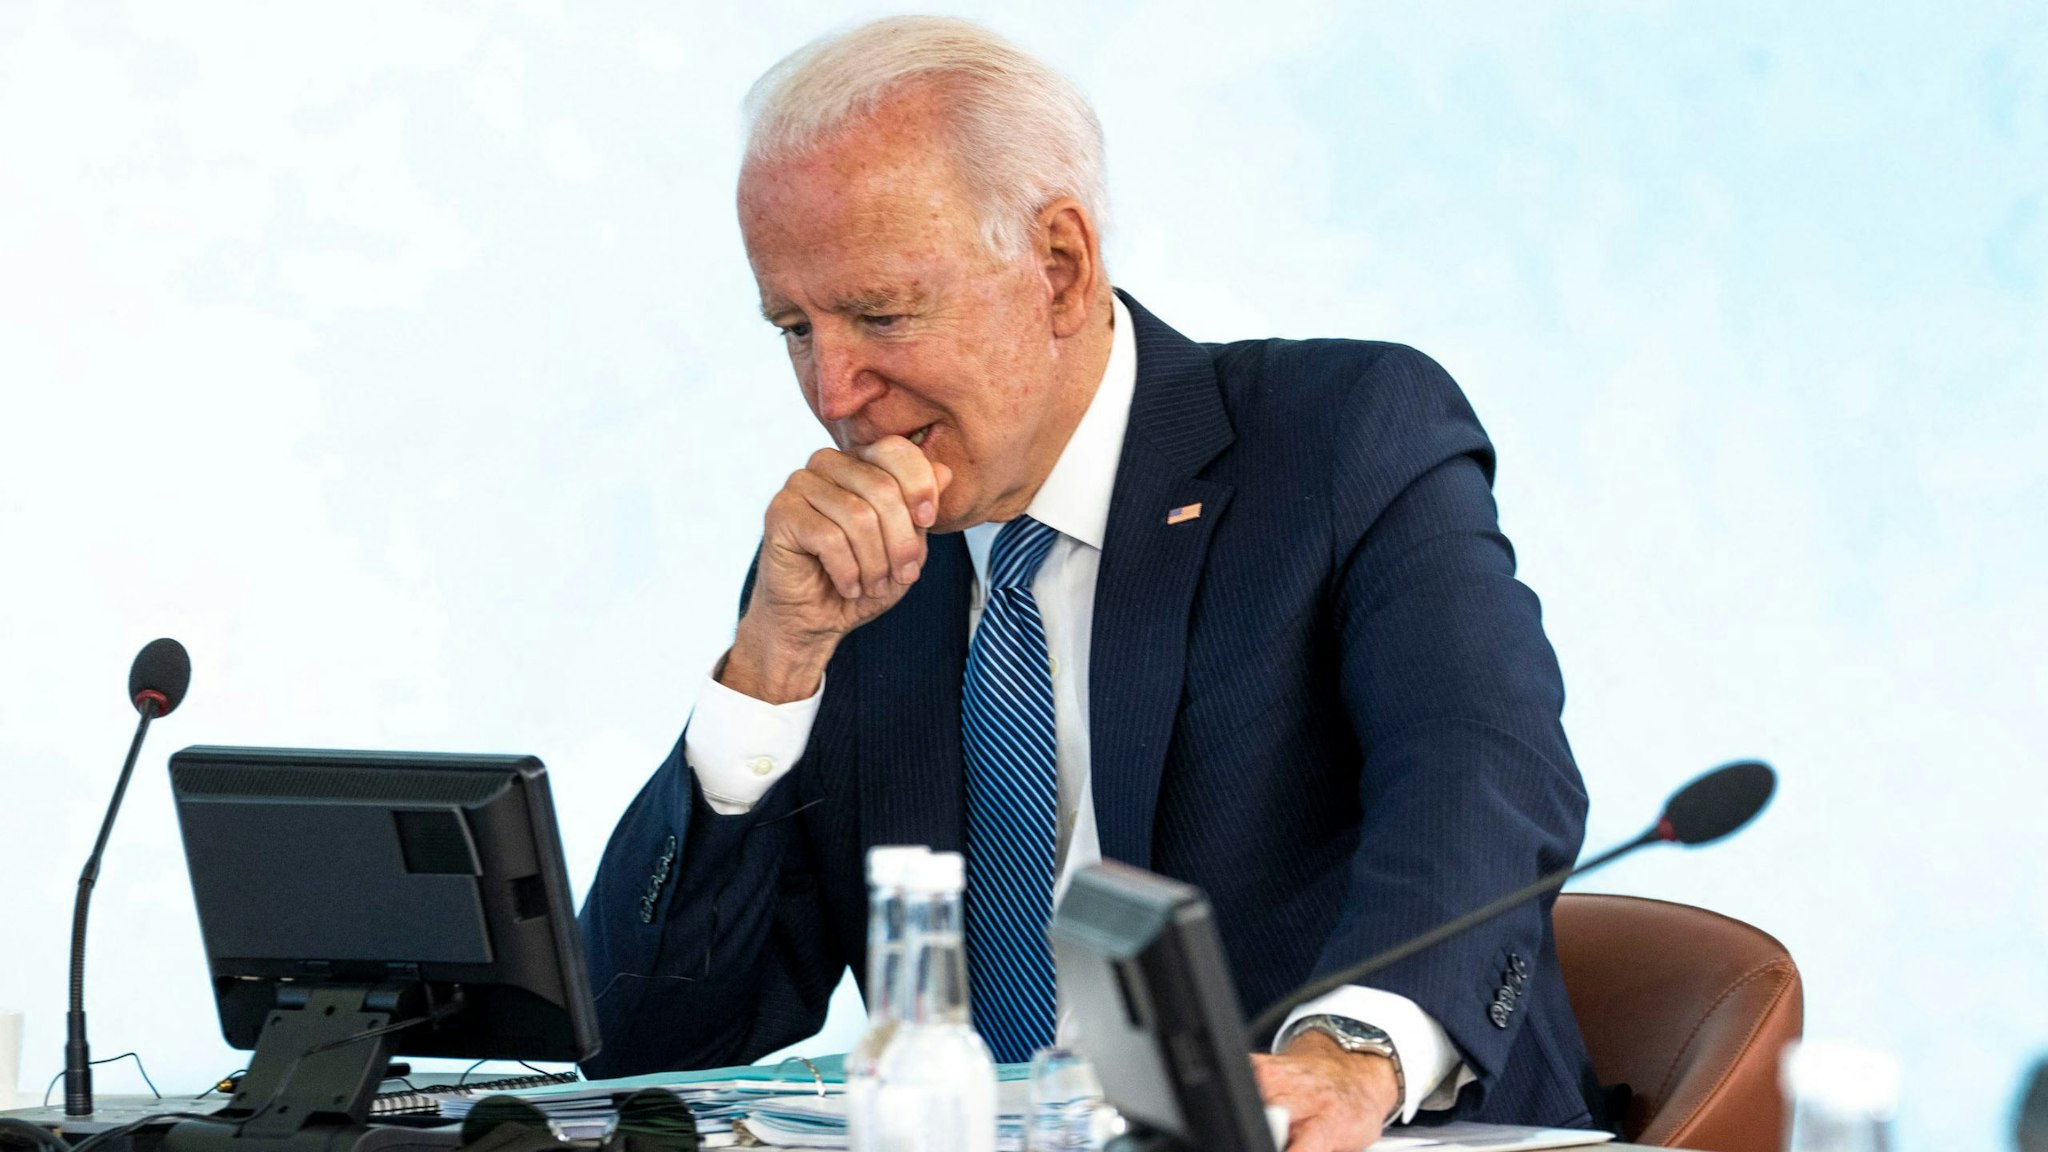 US President Joe Biden (L) and France's President Emmanuel Macron attend a plenary session at the G7 summit in Carbis Bay, Cornwall on June 13, 2021.